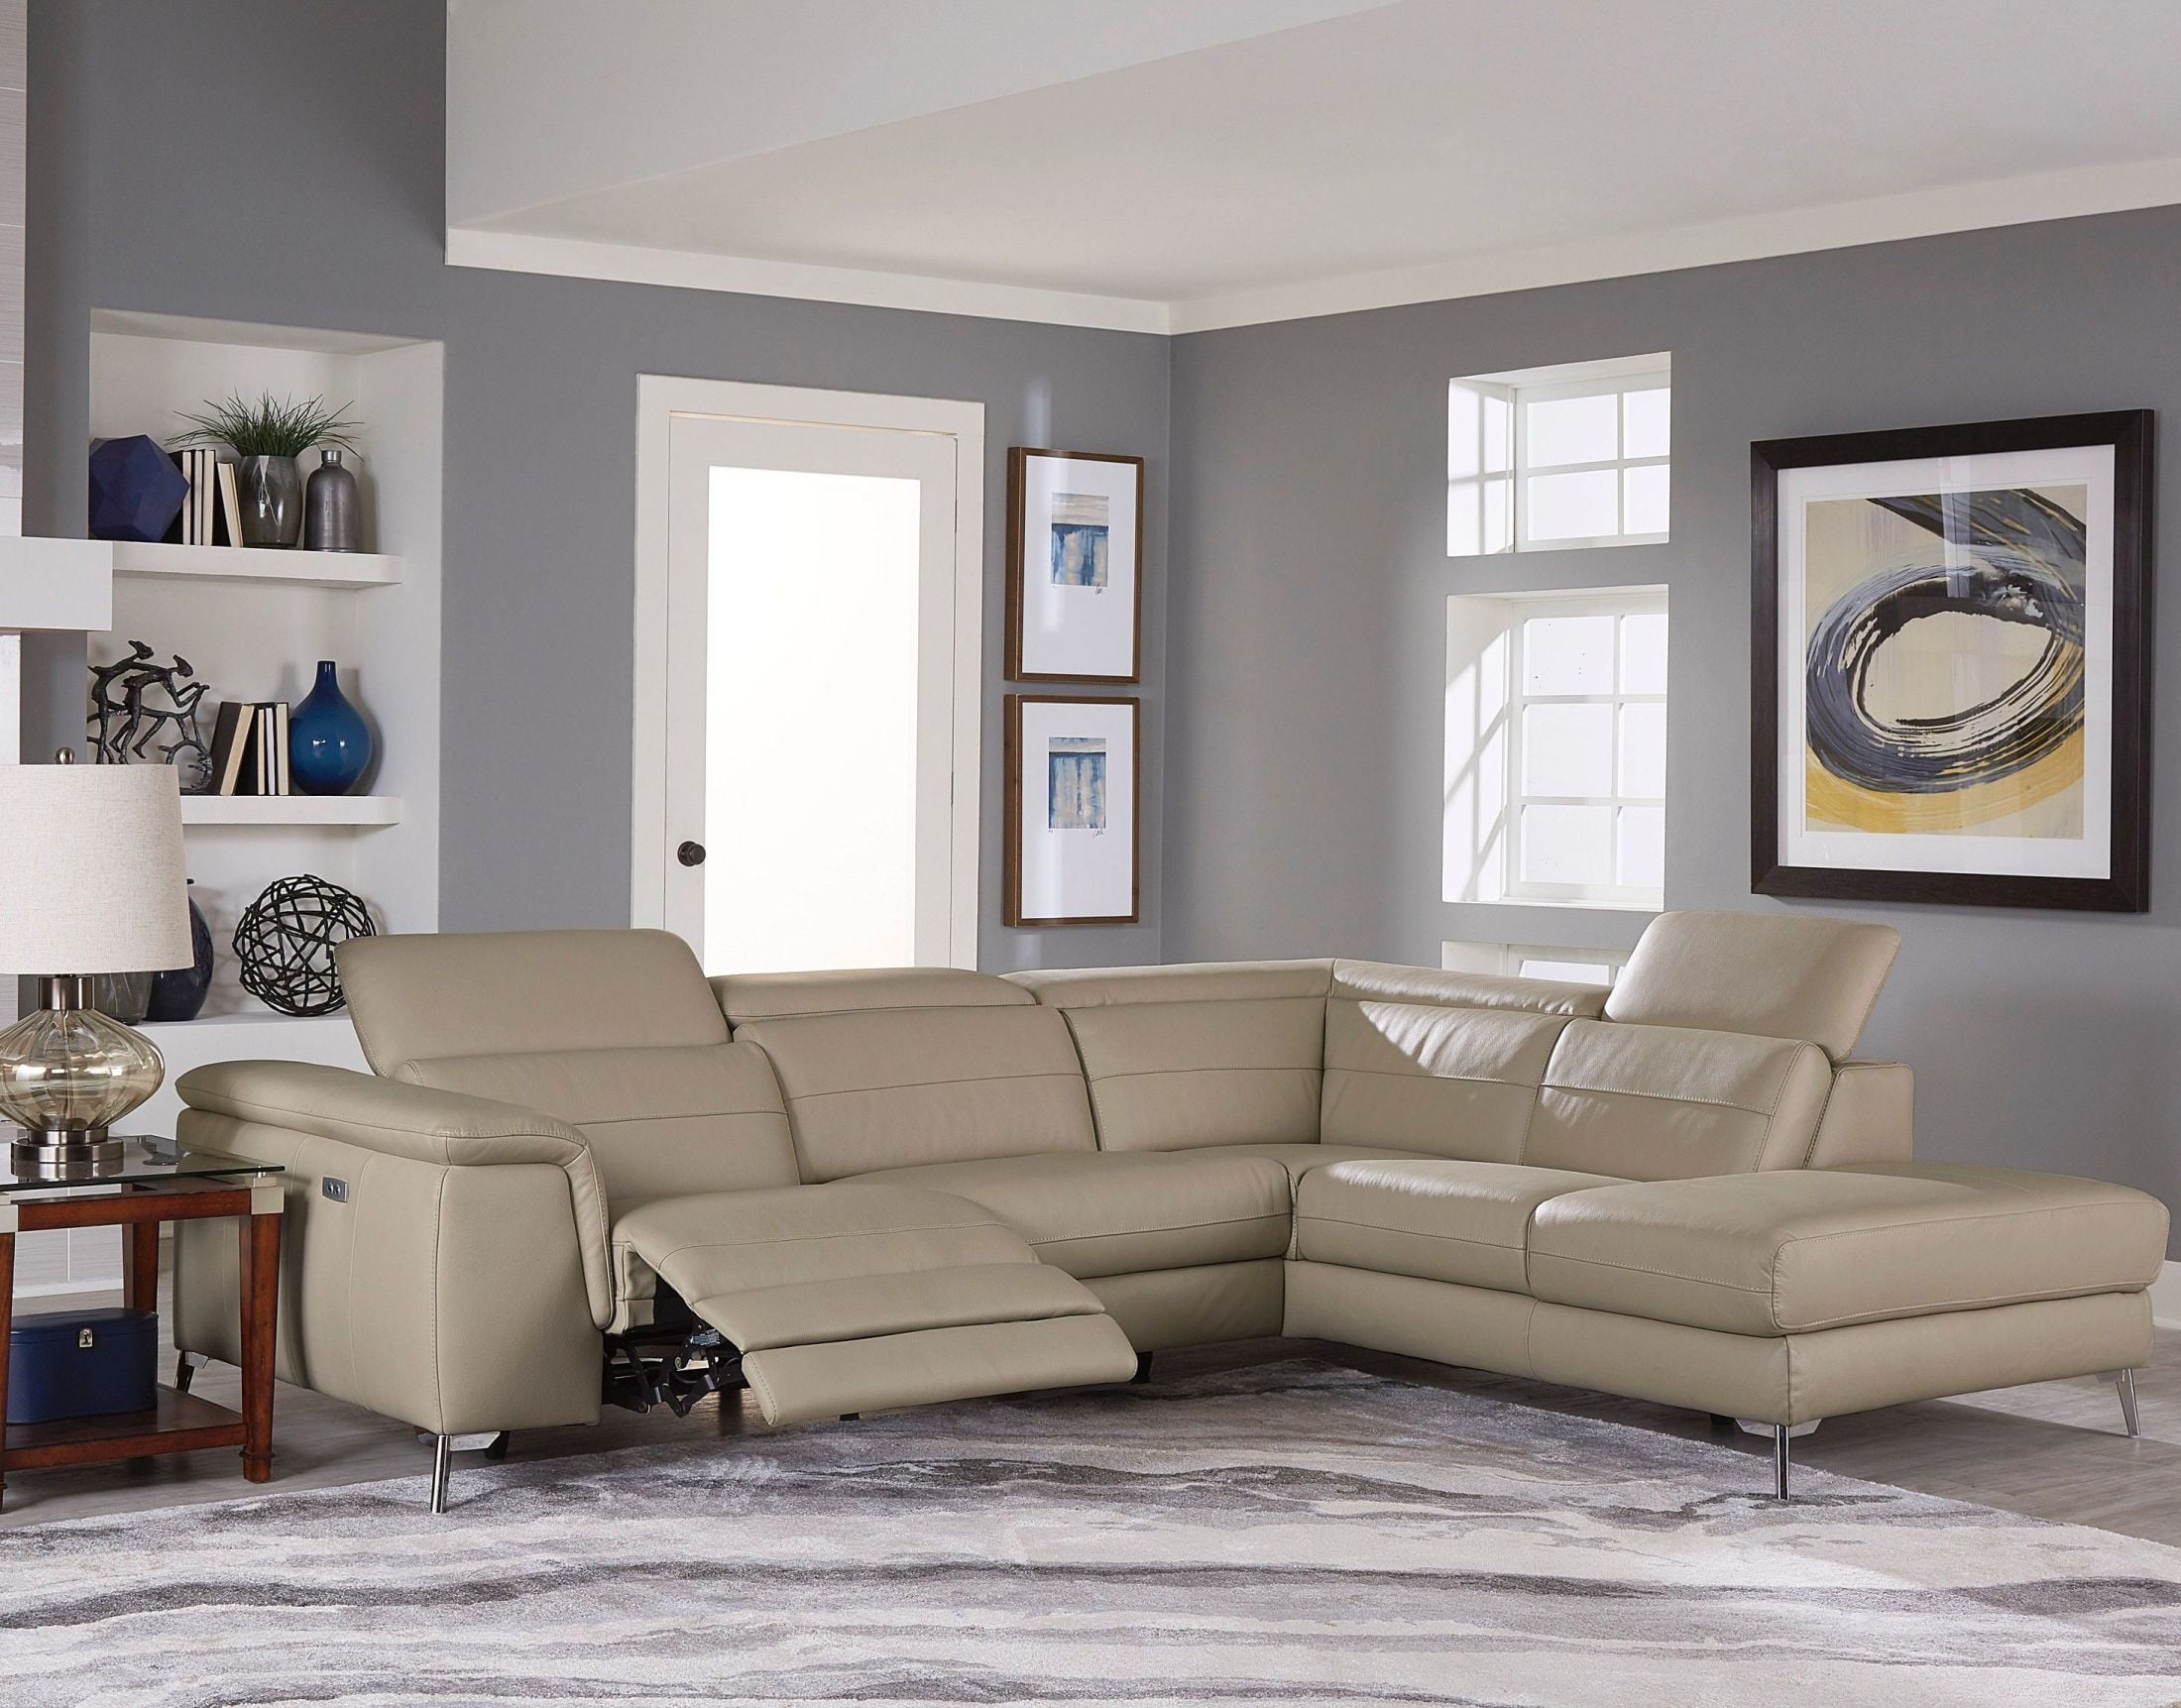 gray or taupe leather sectional sofa